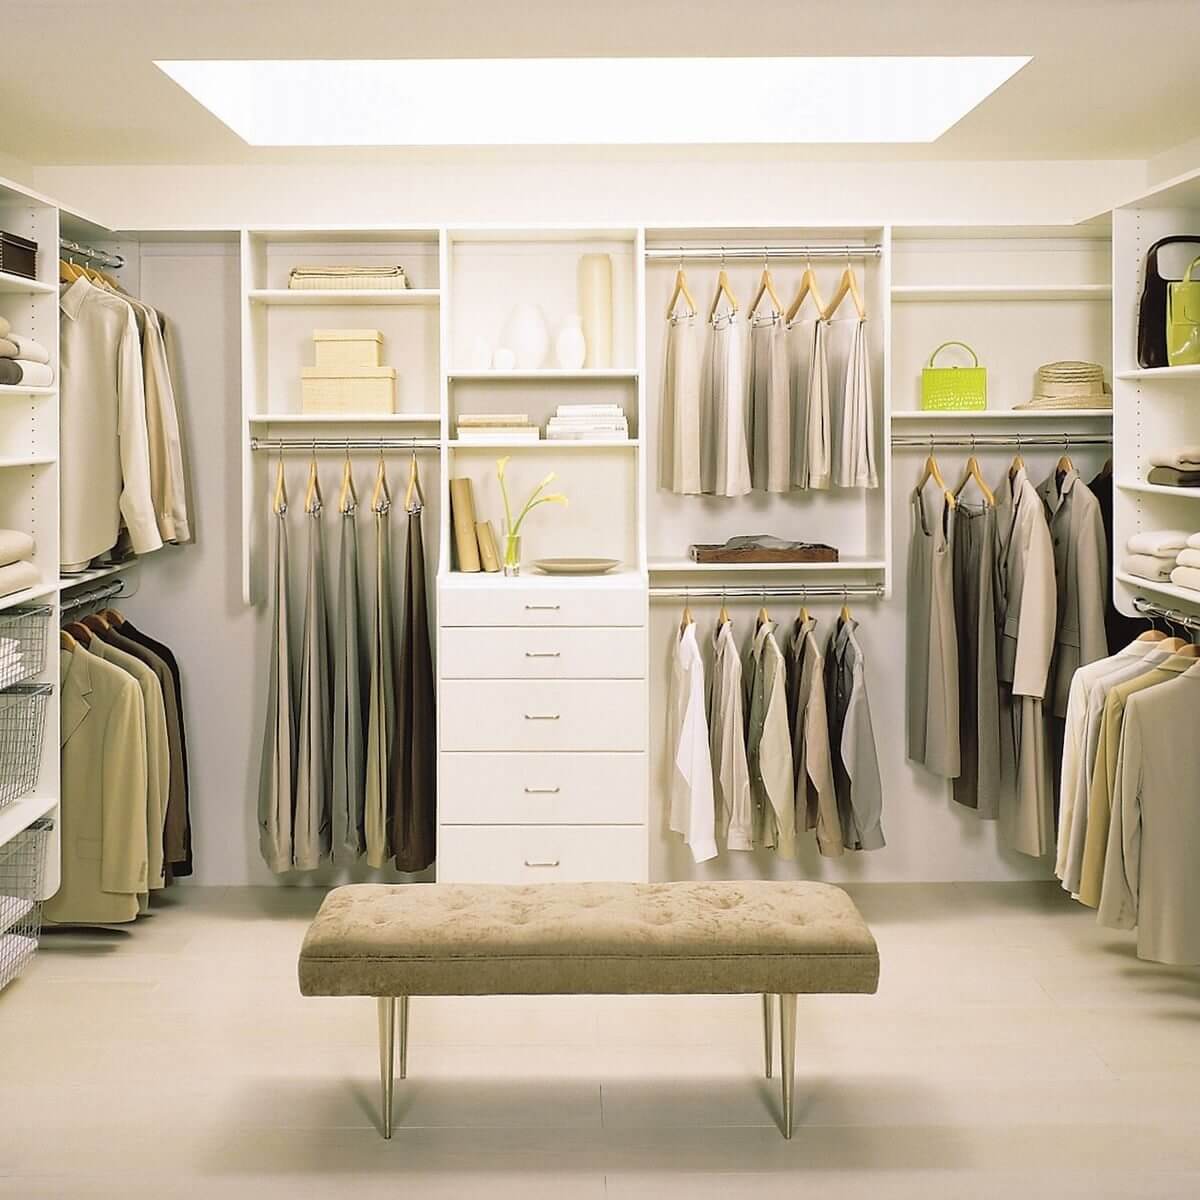 Unique Walk-In Closets For Every Modern Home